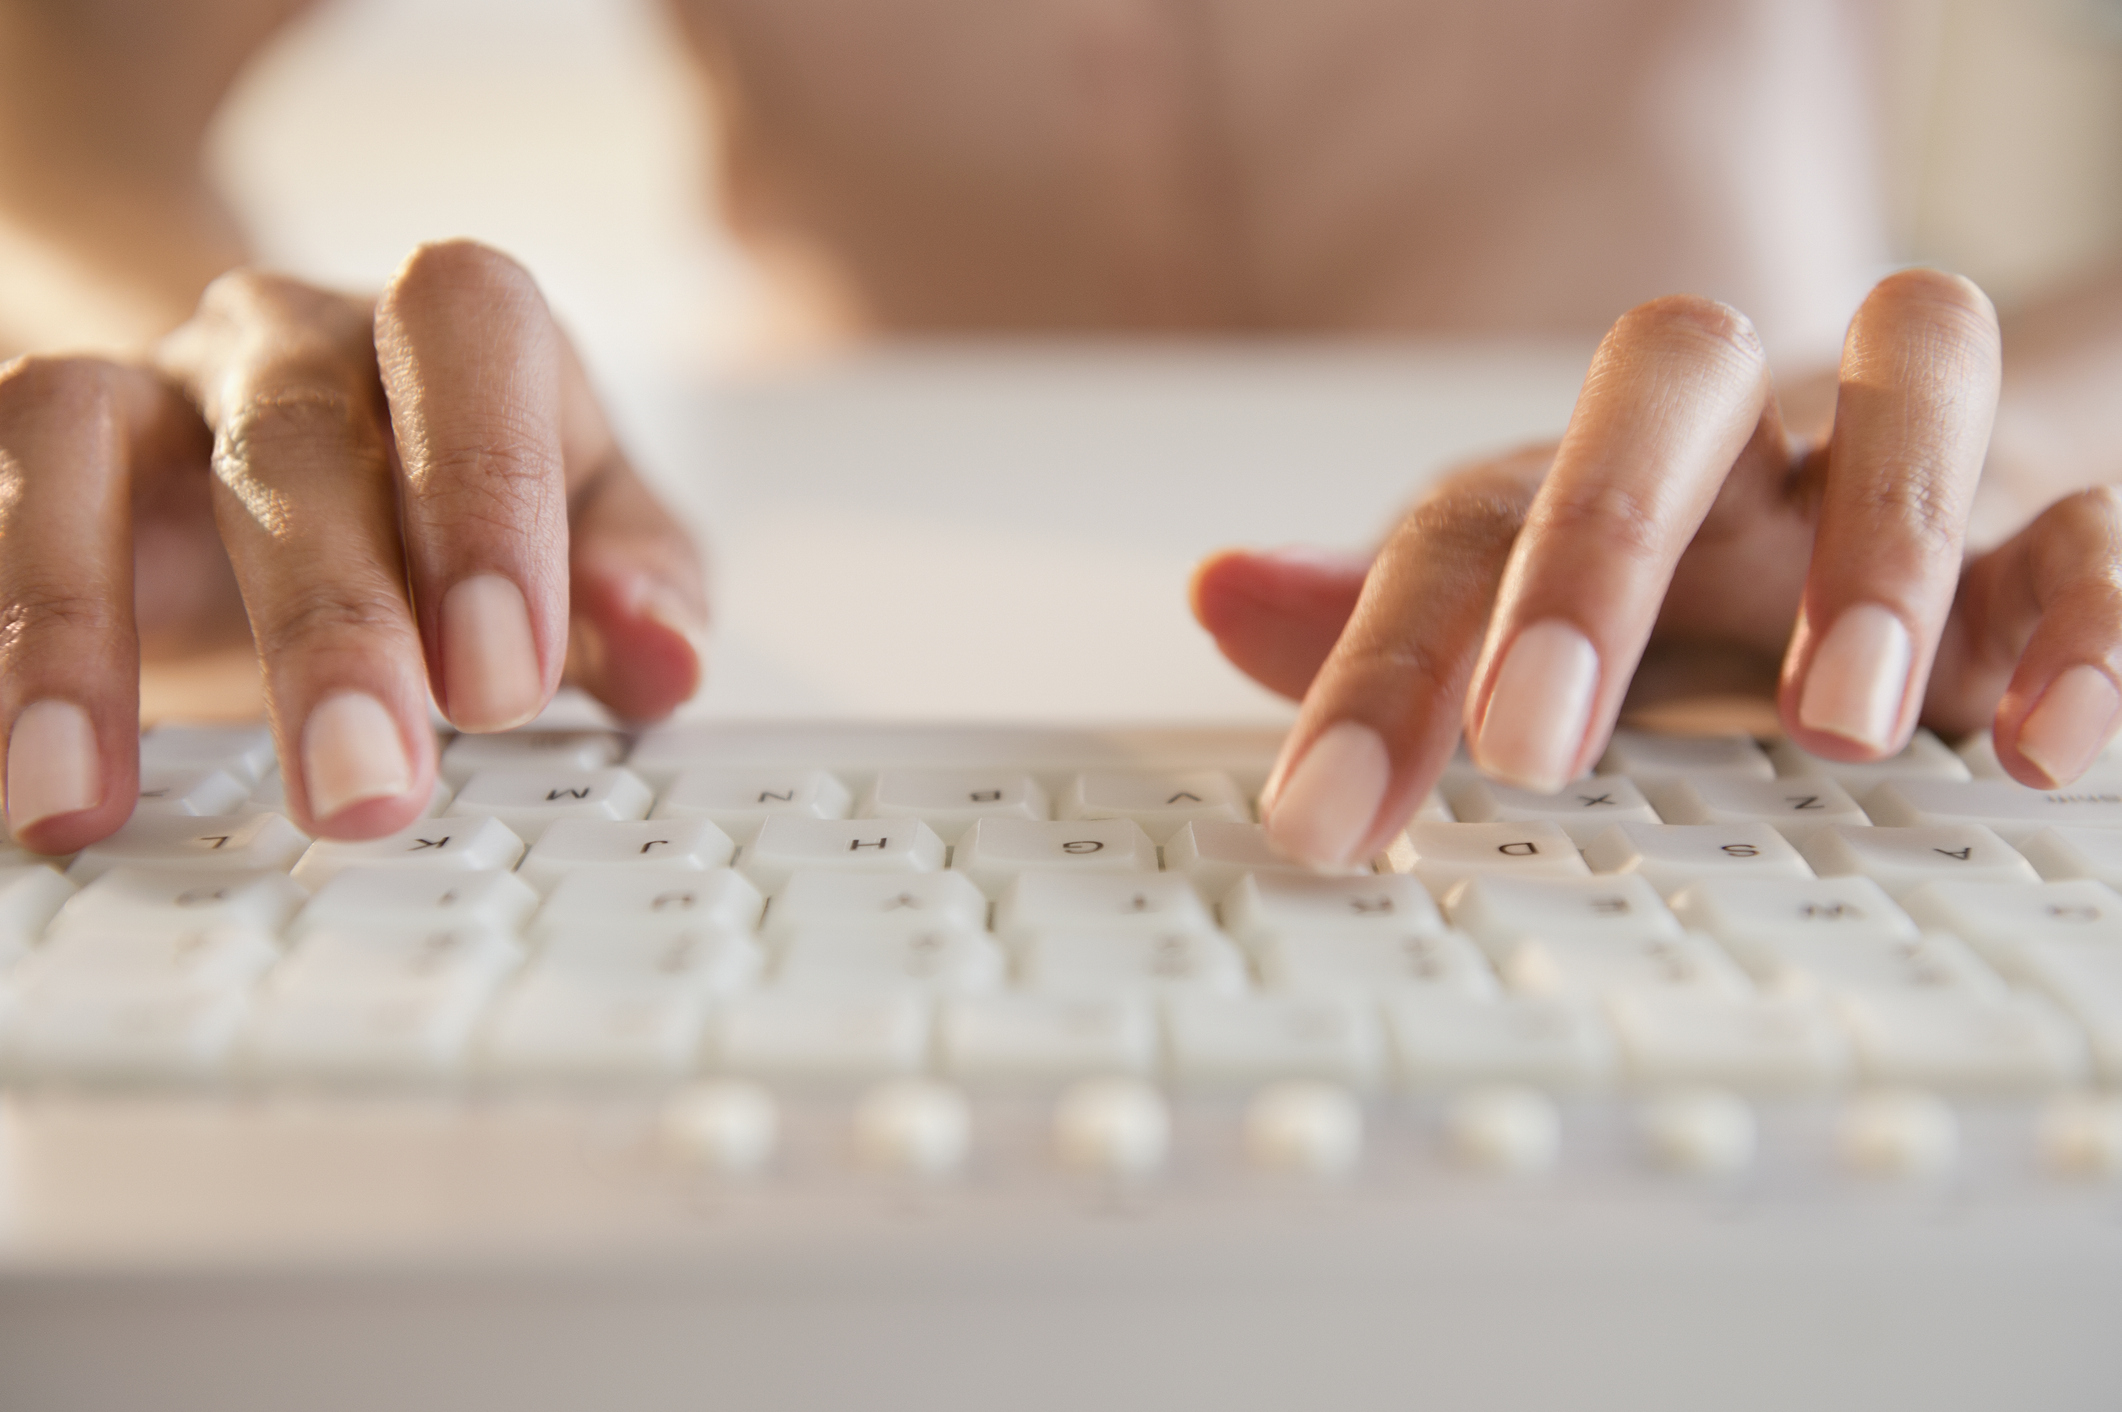 Person&#x27;s hands typing on a keyboard, close-up view, focusing on the activity of typing